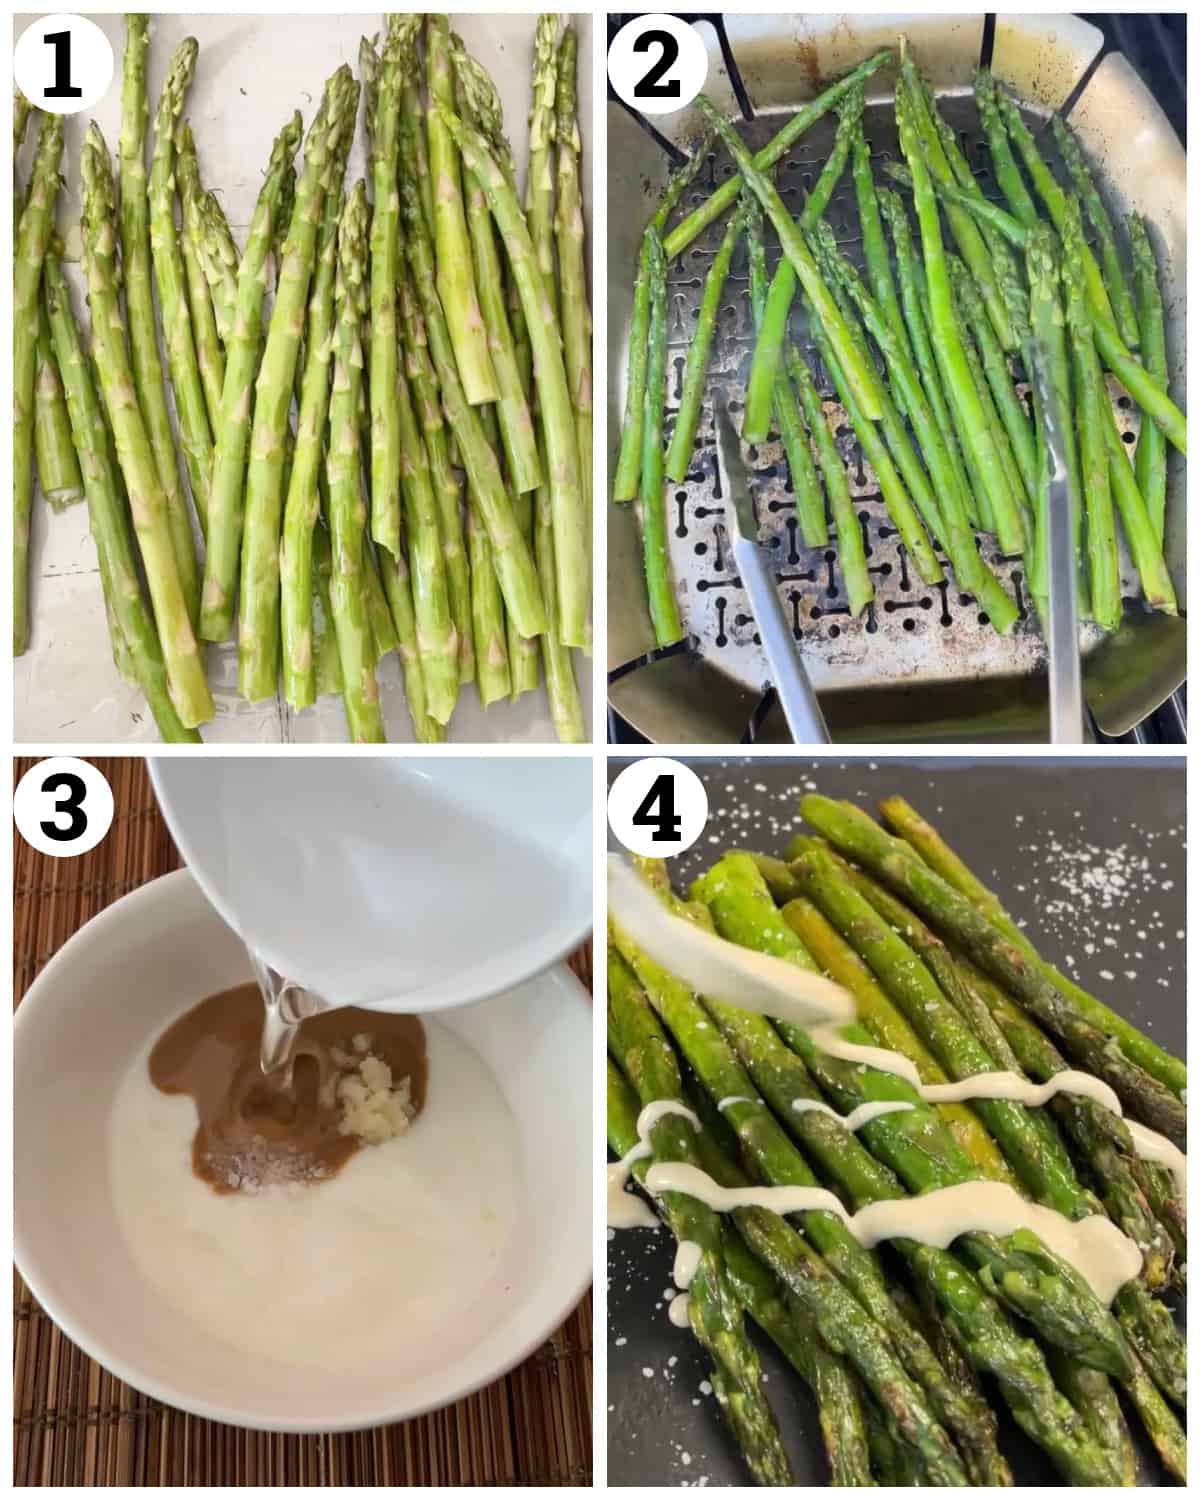 Season the asparagus with salt and pepper then grill and top with tahini yogurt sauce. 